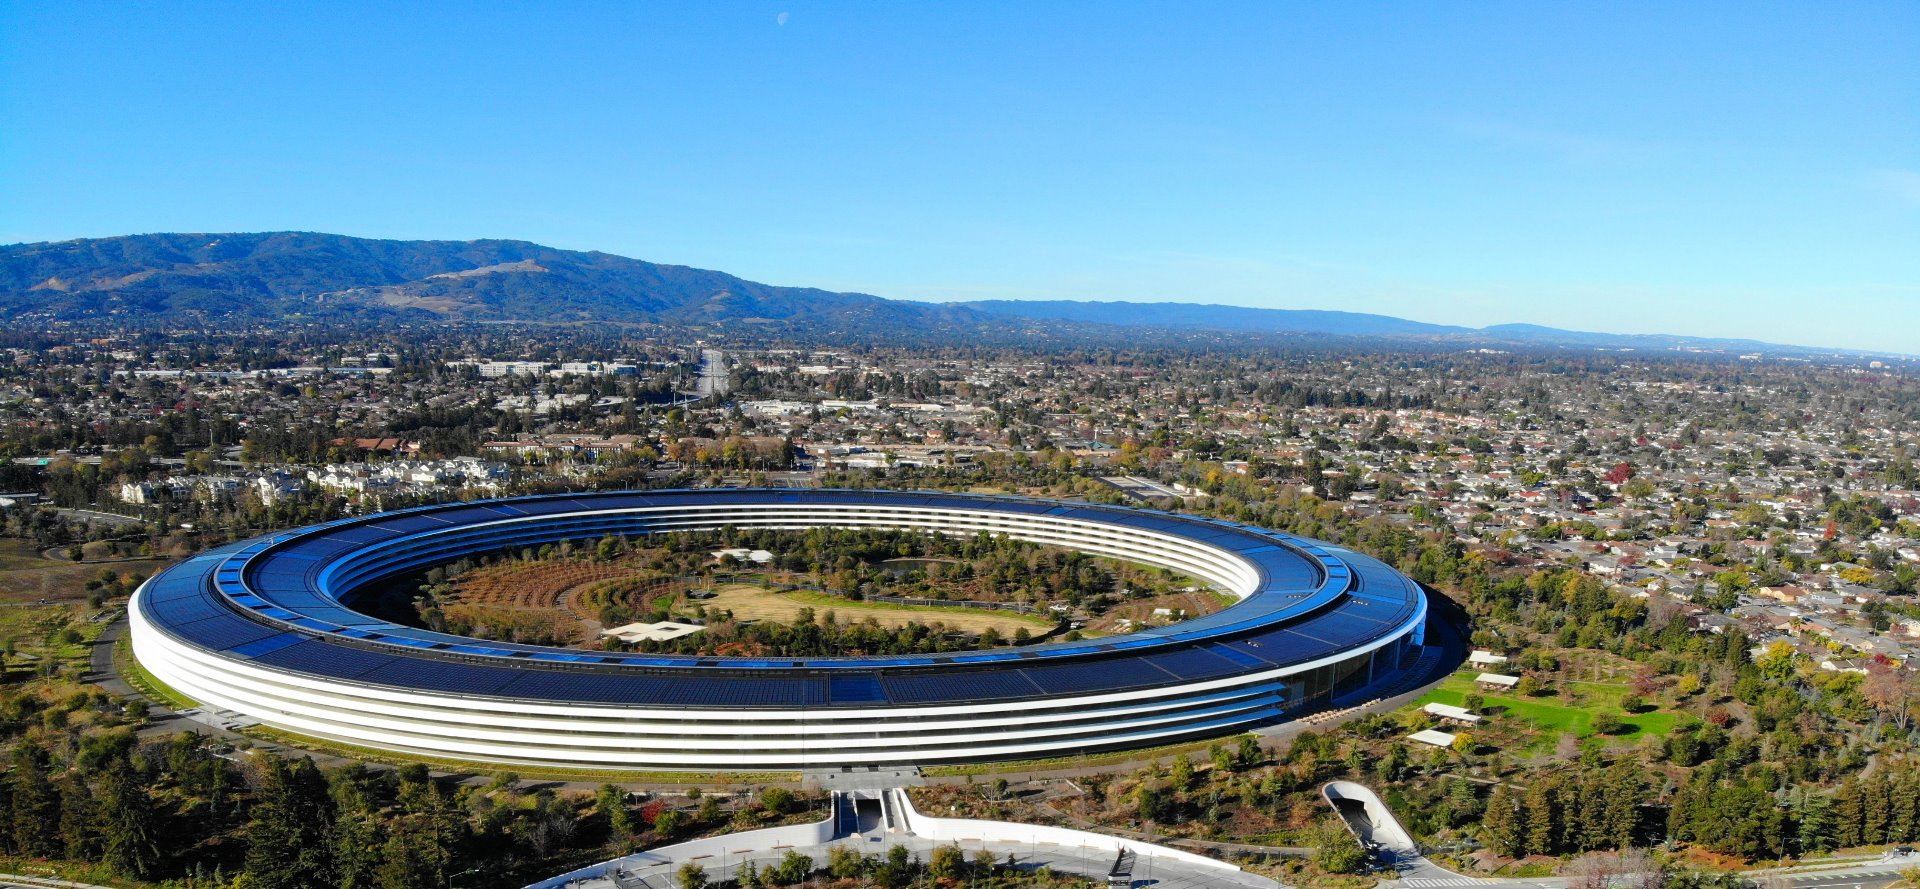 apple_spaceship_ariel_views_apple_park_silicon_valley_guided_tour